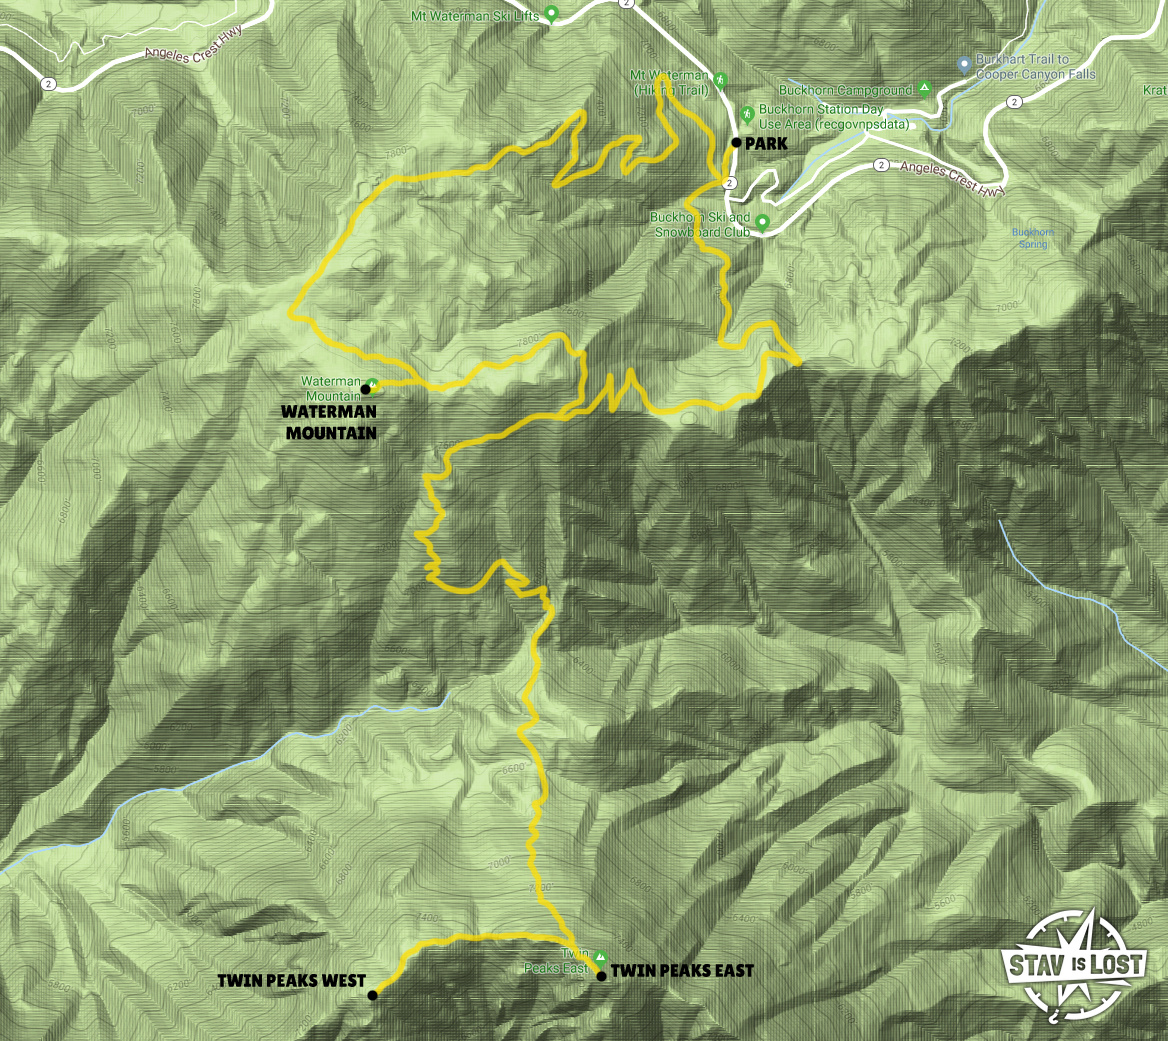 map for Twin Peaks and Waterman Mountain by stav is lost